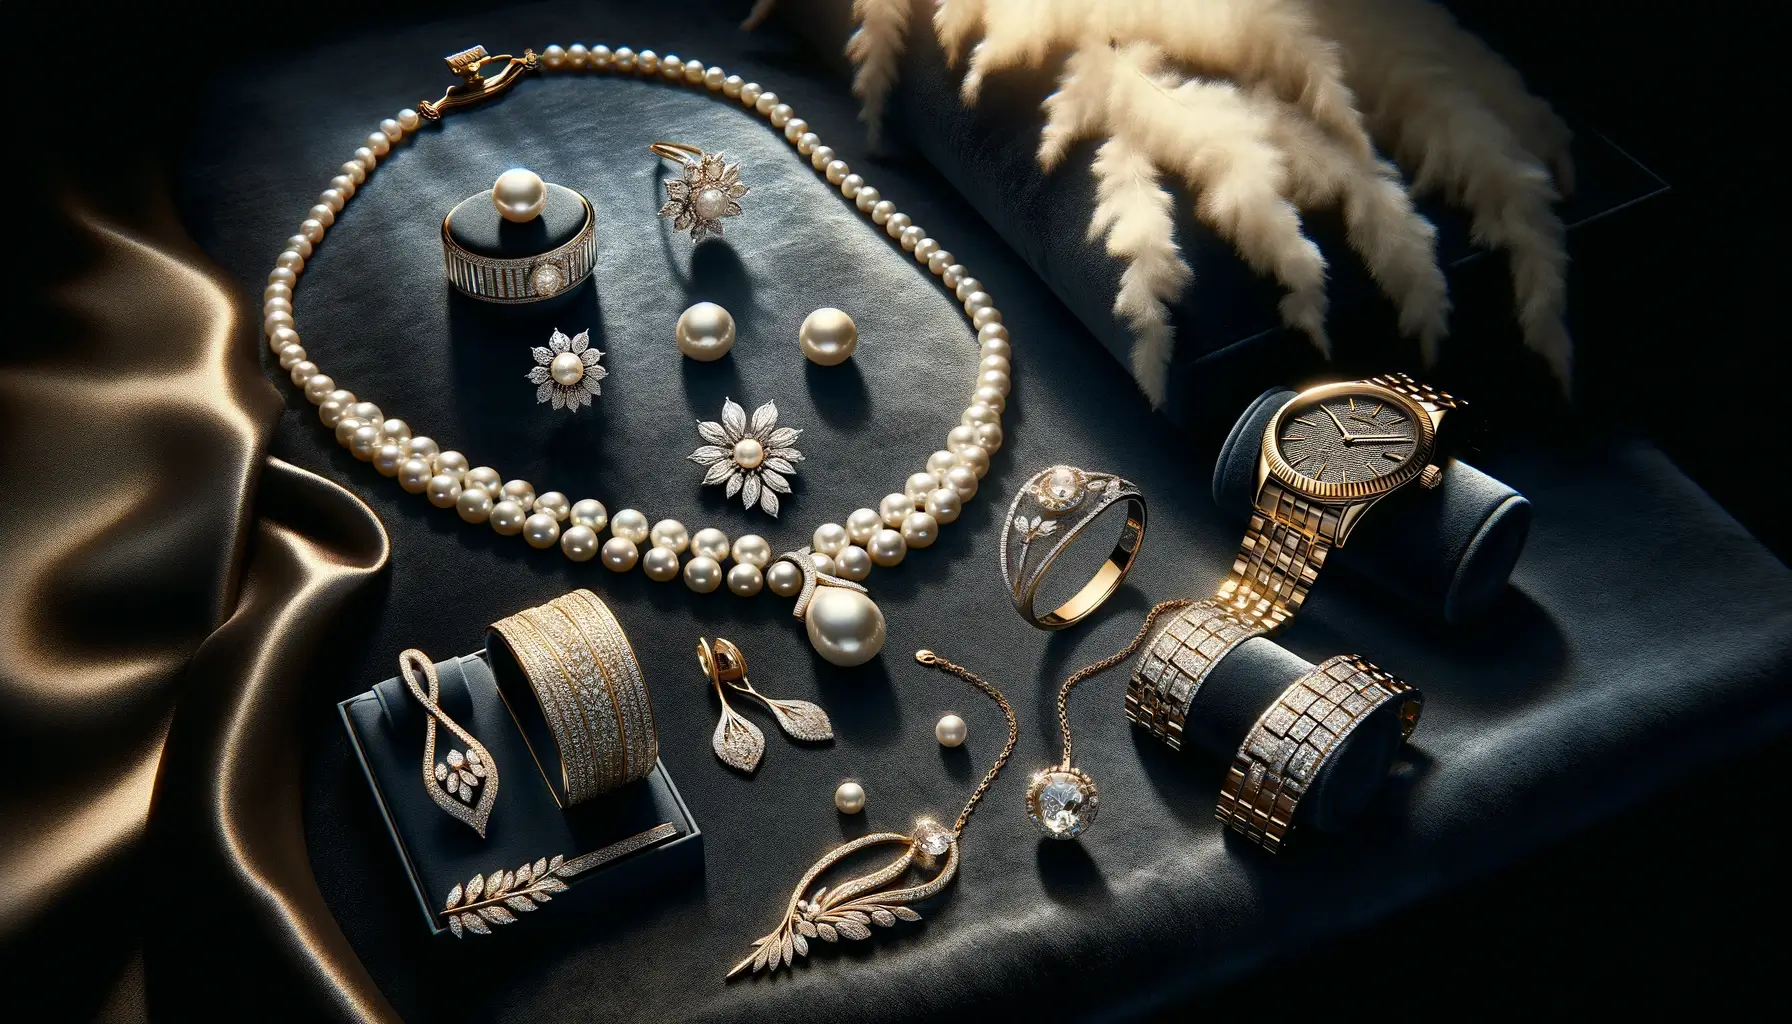 A luxurious selection of jewelry including a pearl necklace, diamond-encrusted earrings, rings, a bangle, a leaf-shaped brooch, and a gold watch, elegantly displayed on a dark velvet background with a satin fabric accent.